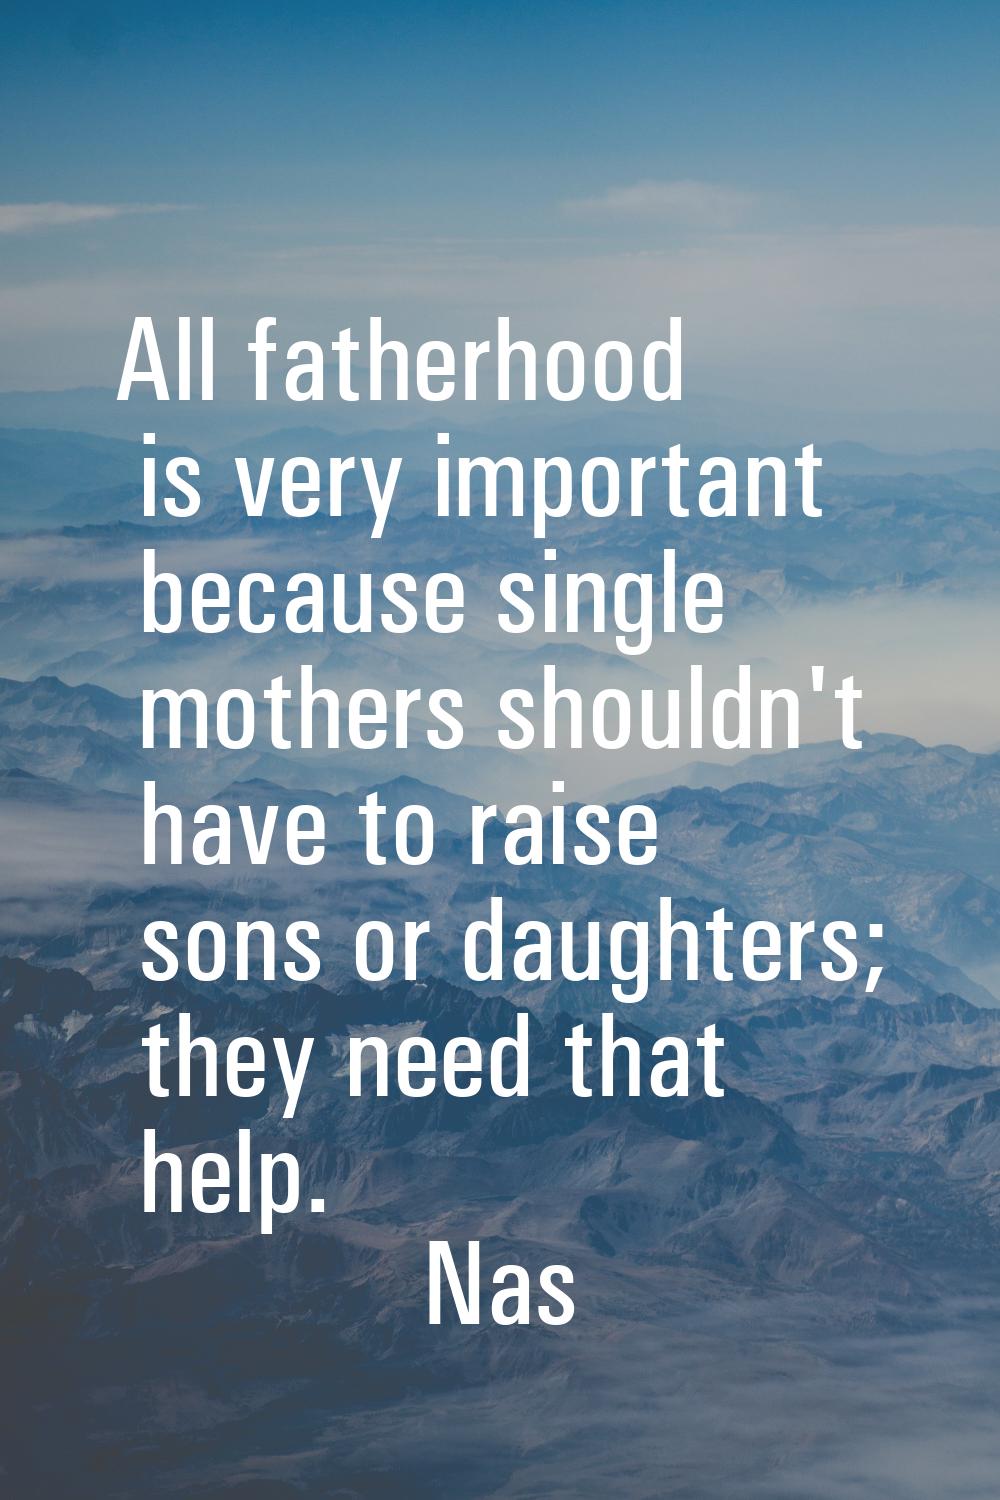 All fatherhood is very important because single mothers shouldn't have to raise sons or daughters; 